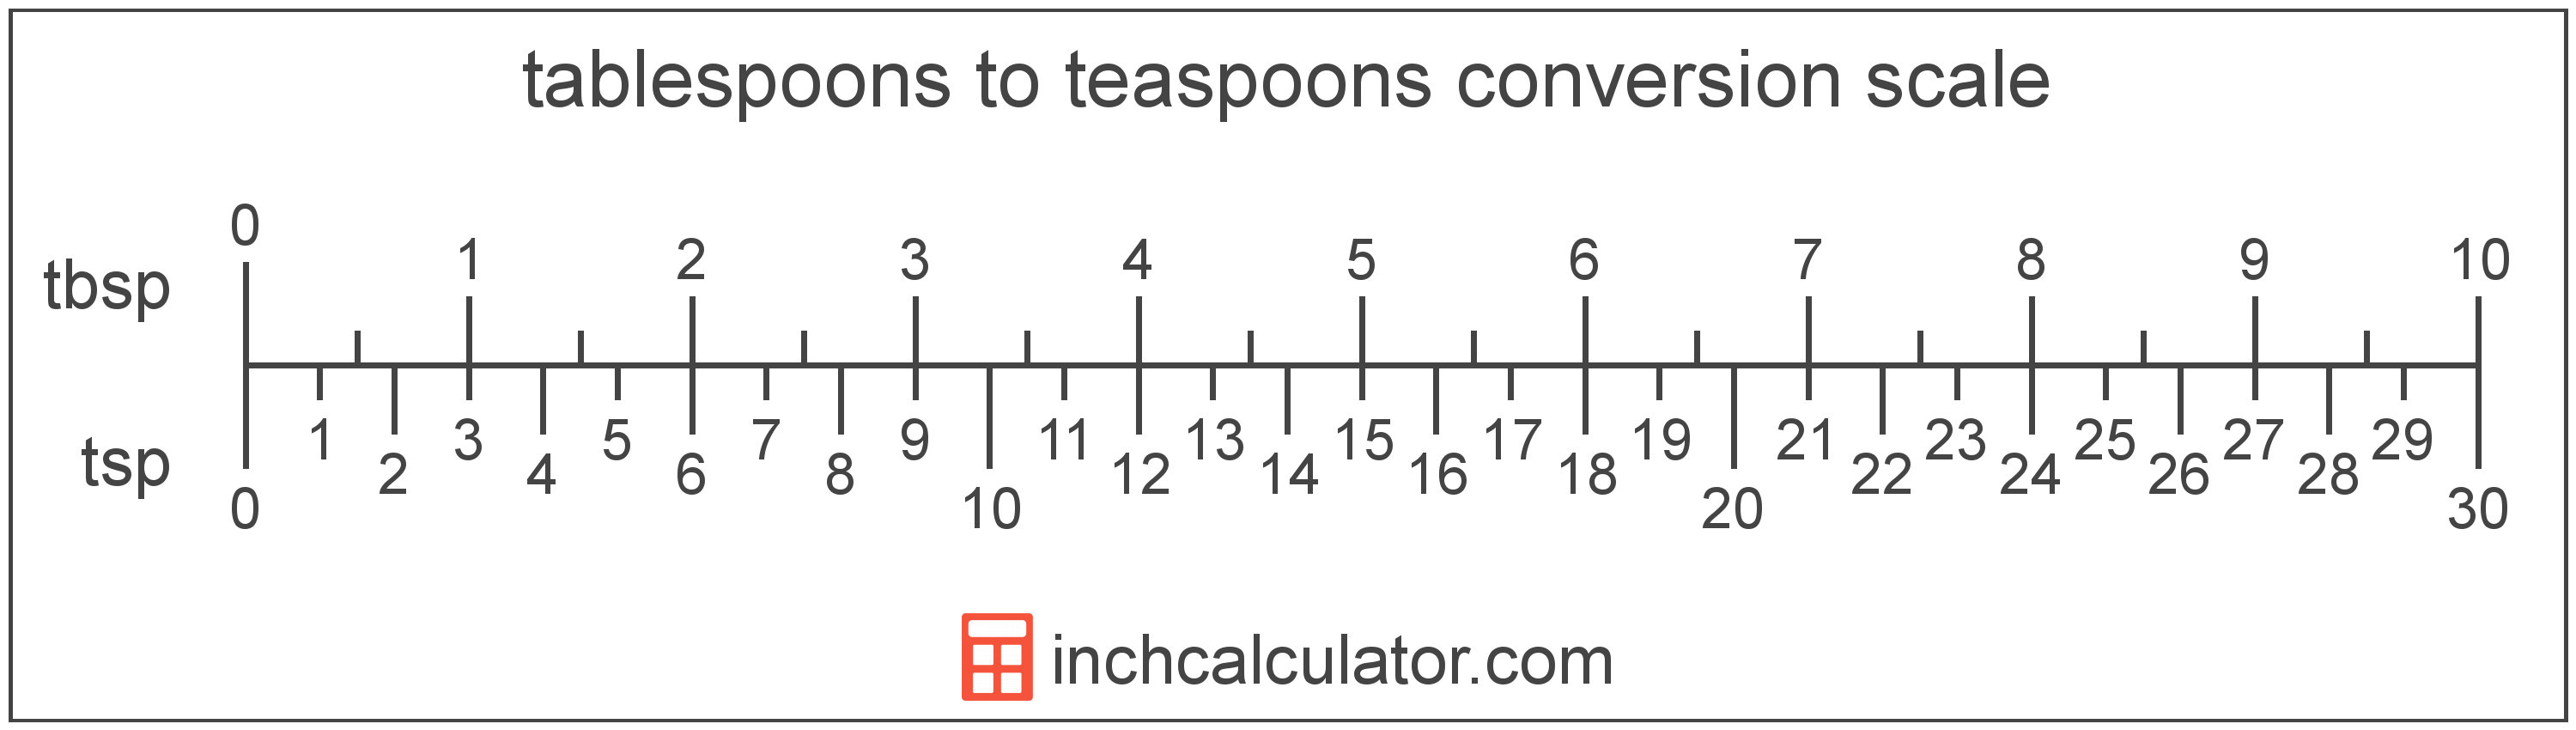 teaspoons-to-tablespoons-conversion-tsp-to-tbsp